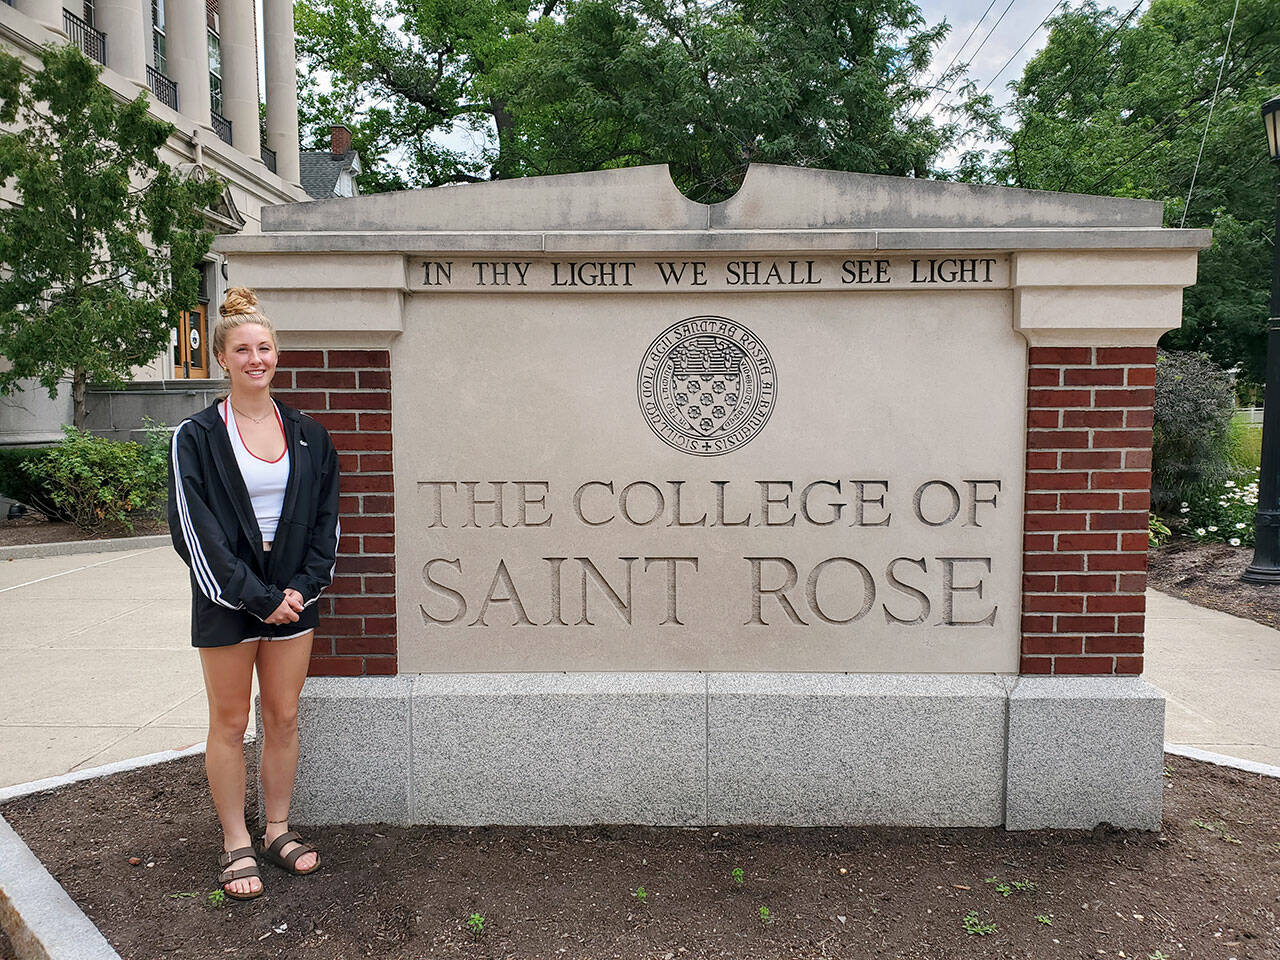 Port Angeles High School and Peninsula College alum Kyrsten McGuffey is continuing her college soccer career this fall at The College of Saint Rose, an NCAA Division II powerhouse in Albany, N.Y.